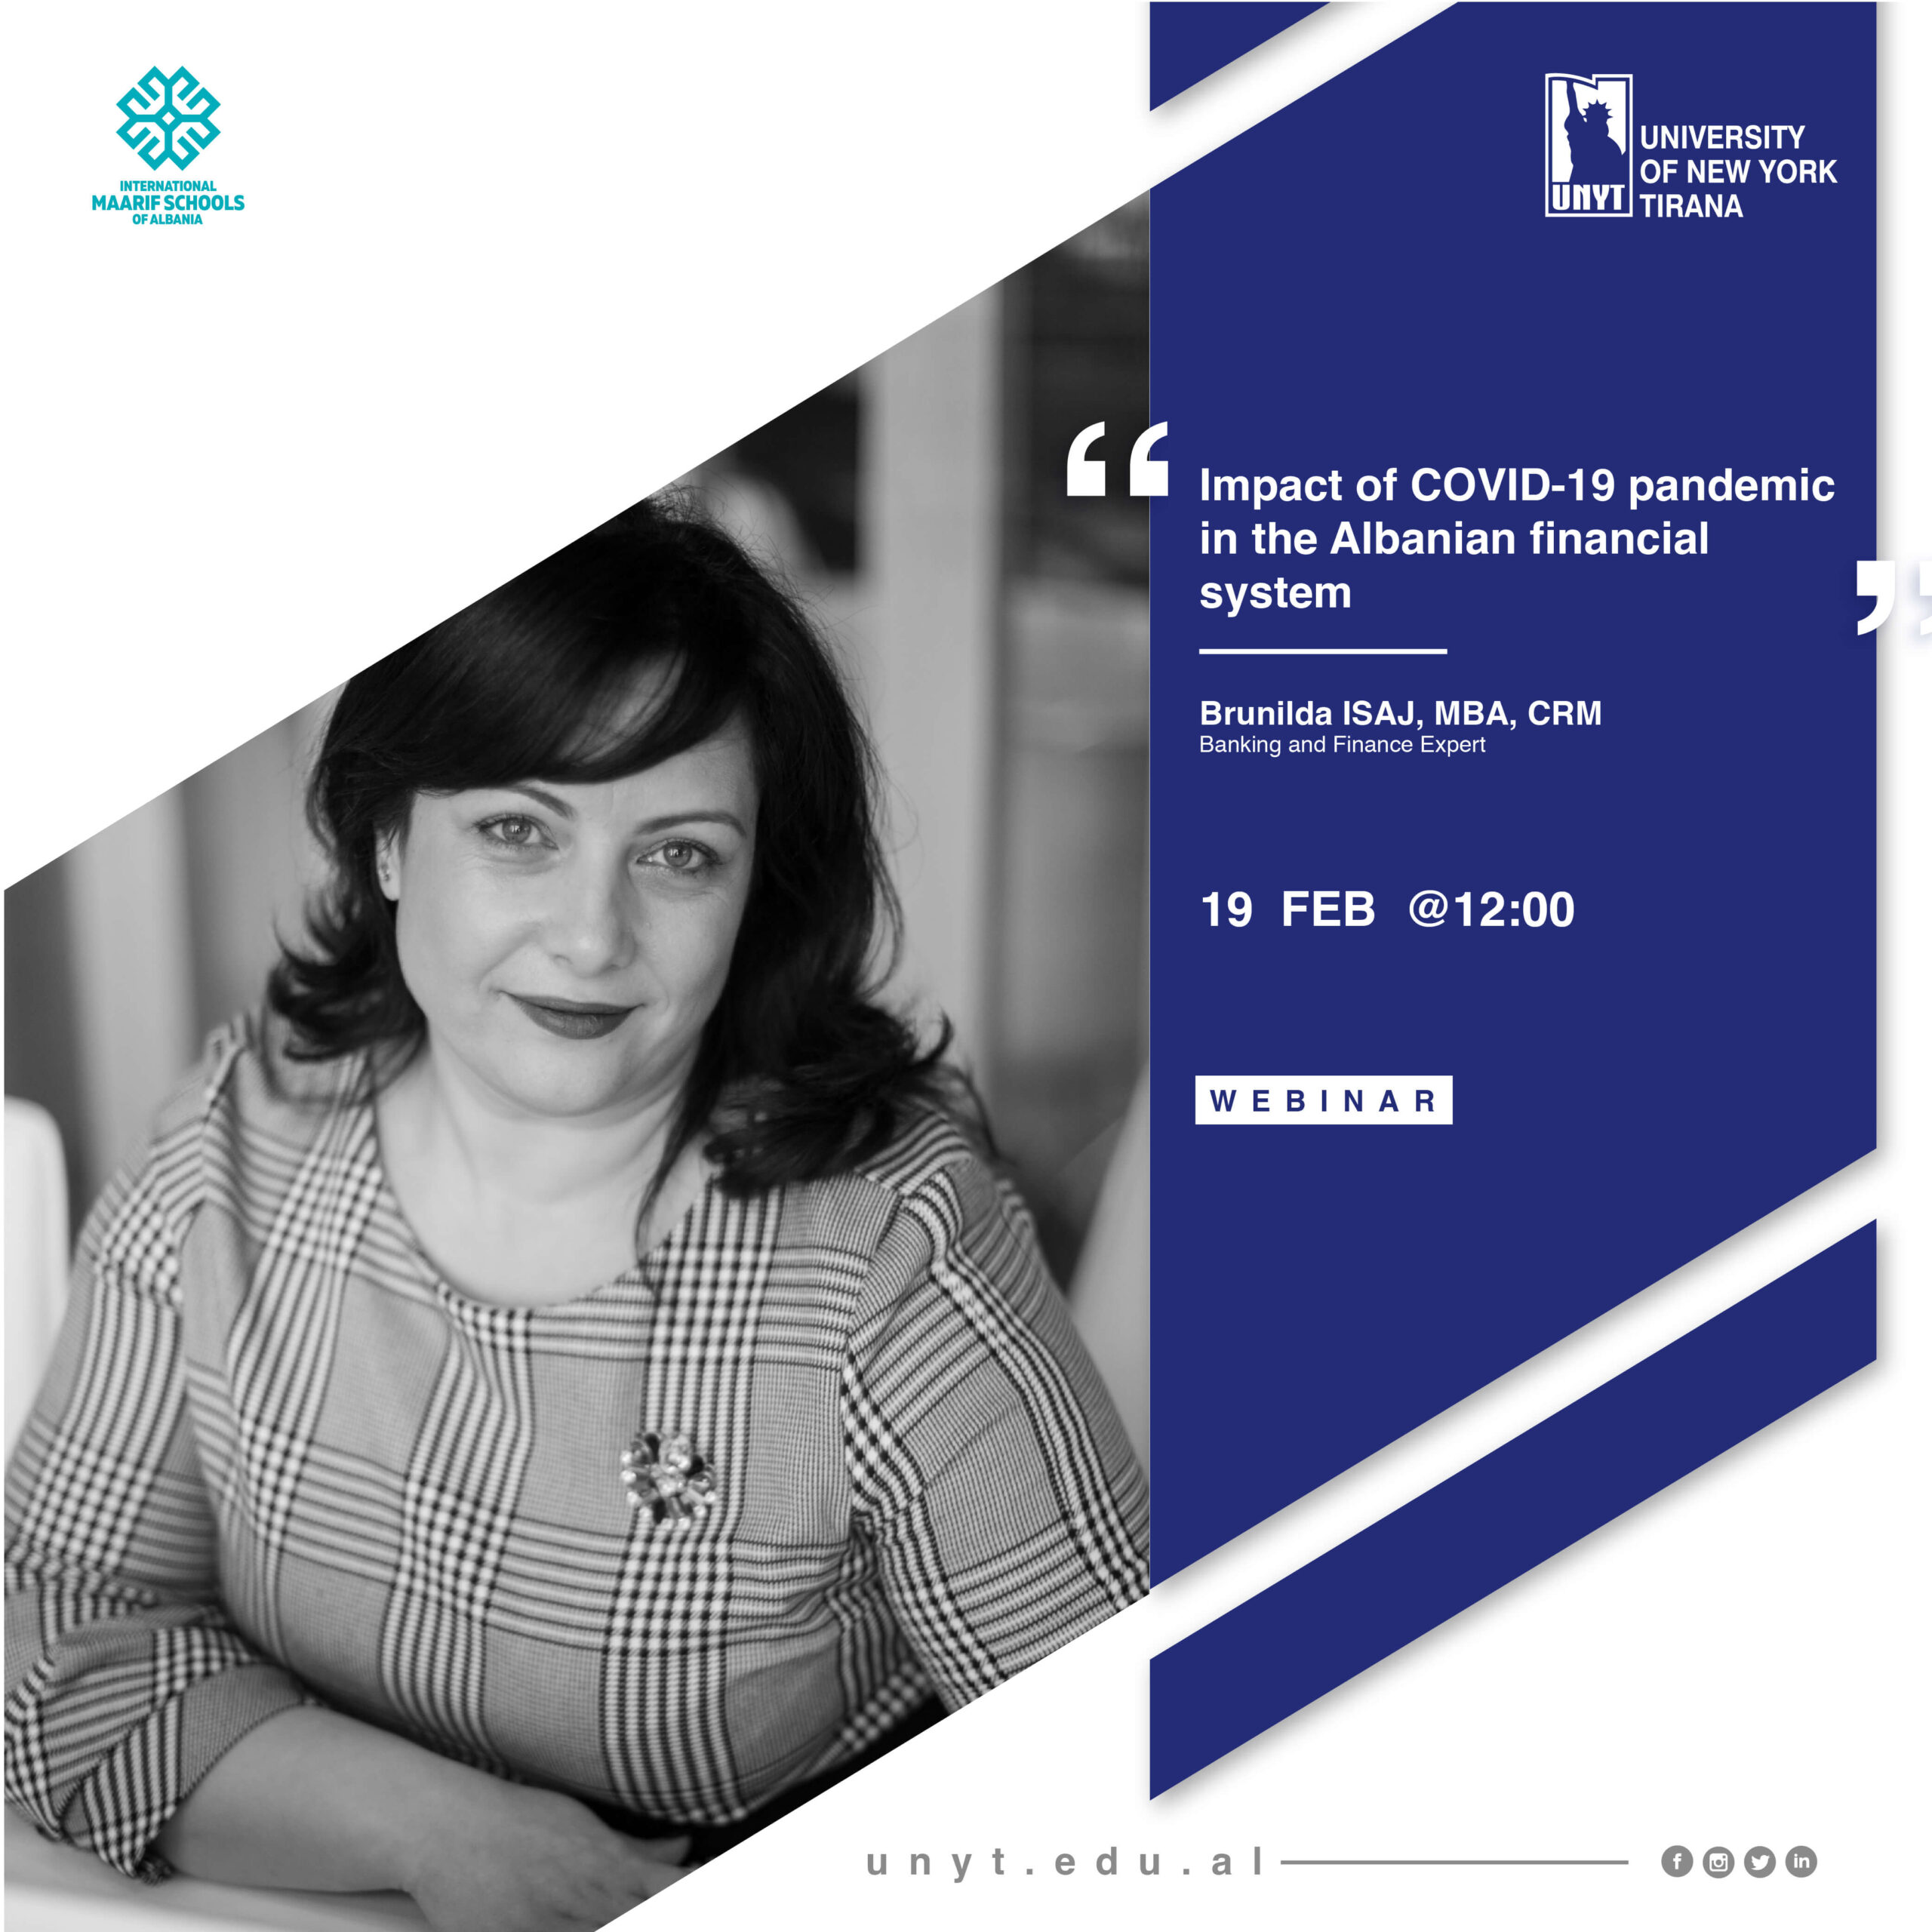 “Impact of COVID-19 pandemic in the Albanian financial system” | Brunilda Isaj, MBA, CRM